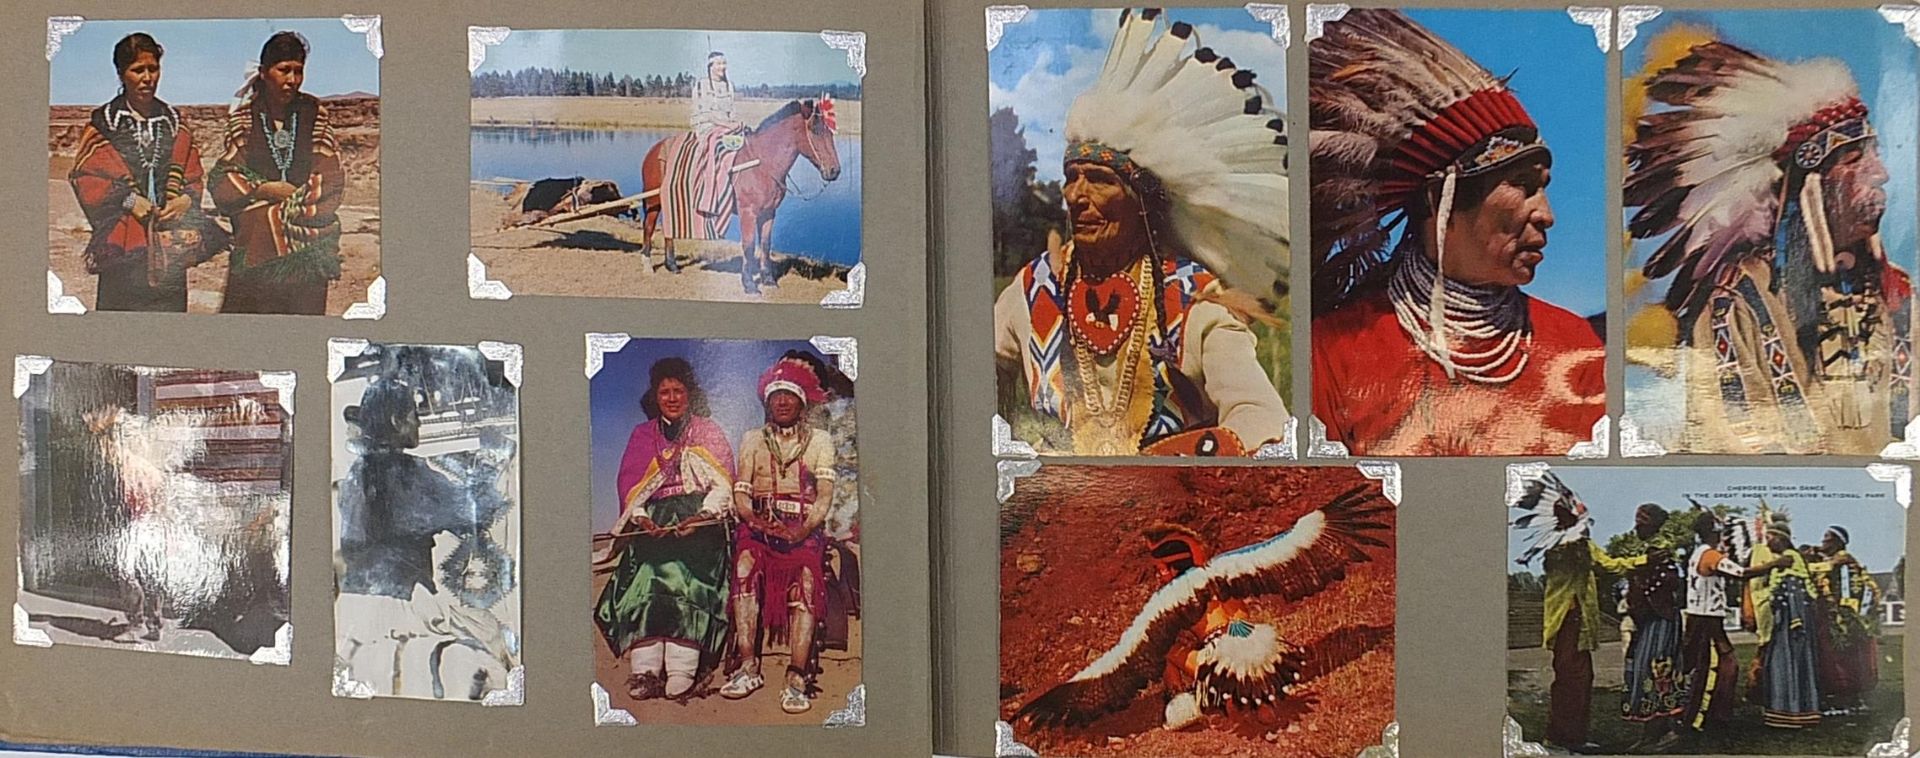 North American Indian photographs, some black and white, arranged in an album - Image 3 of 13